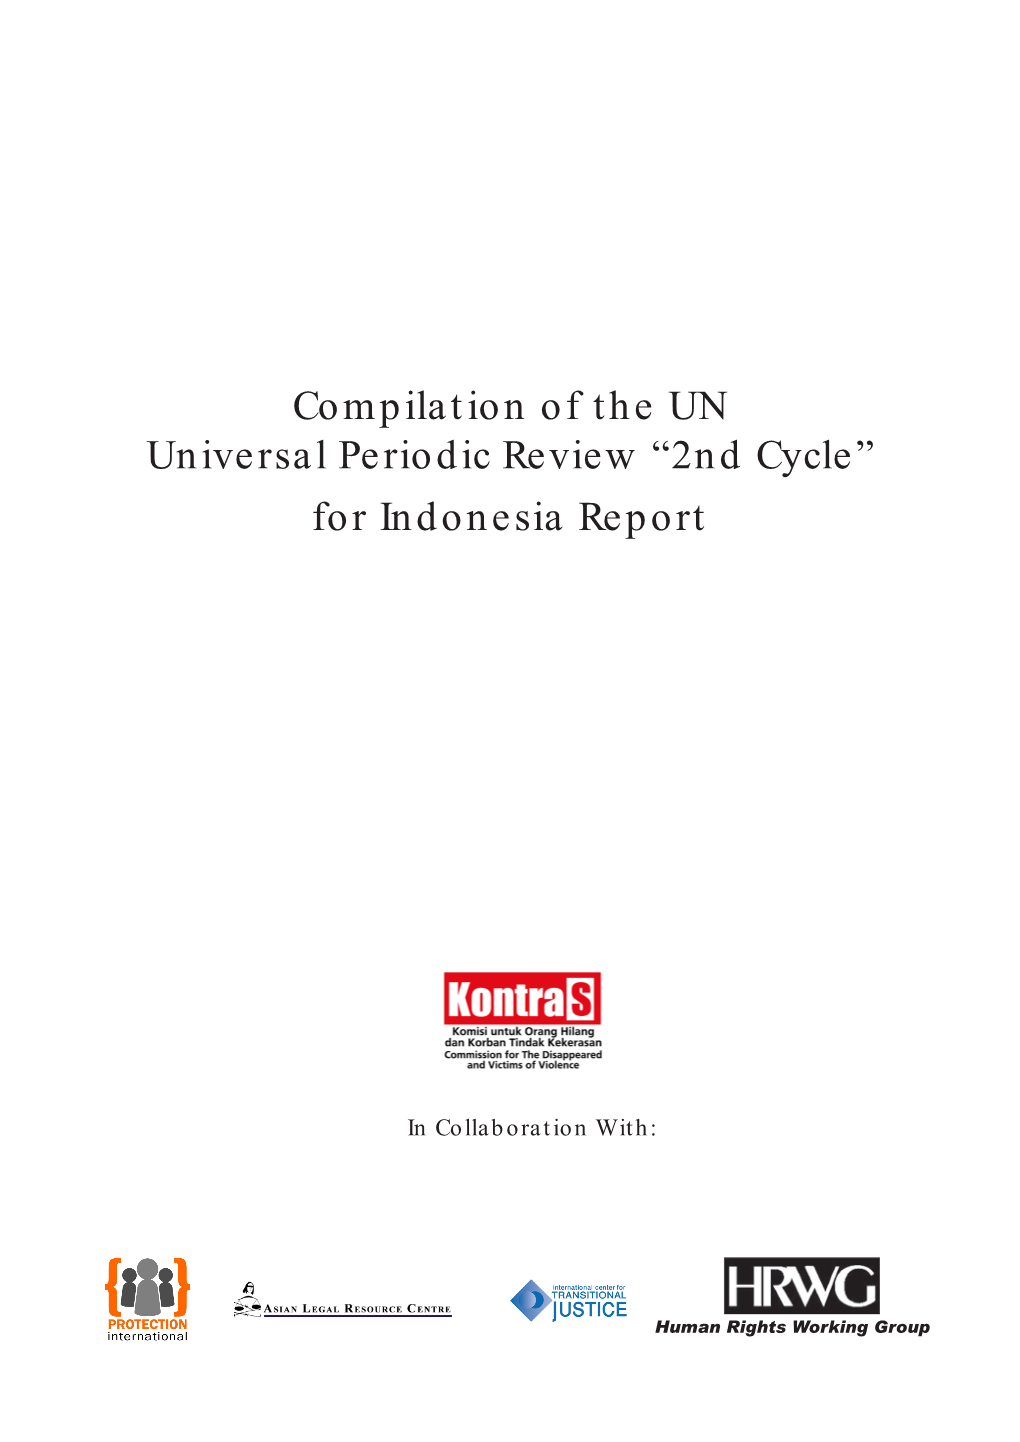 Compilation of the UN Universal Periodic Review “2Nd Cycle” for Indonesia Report